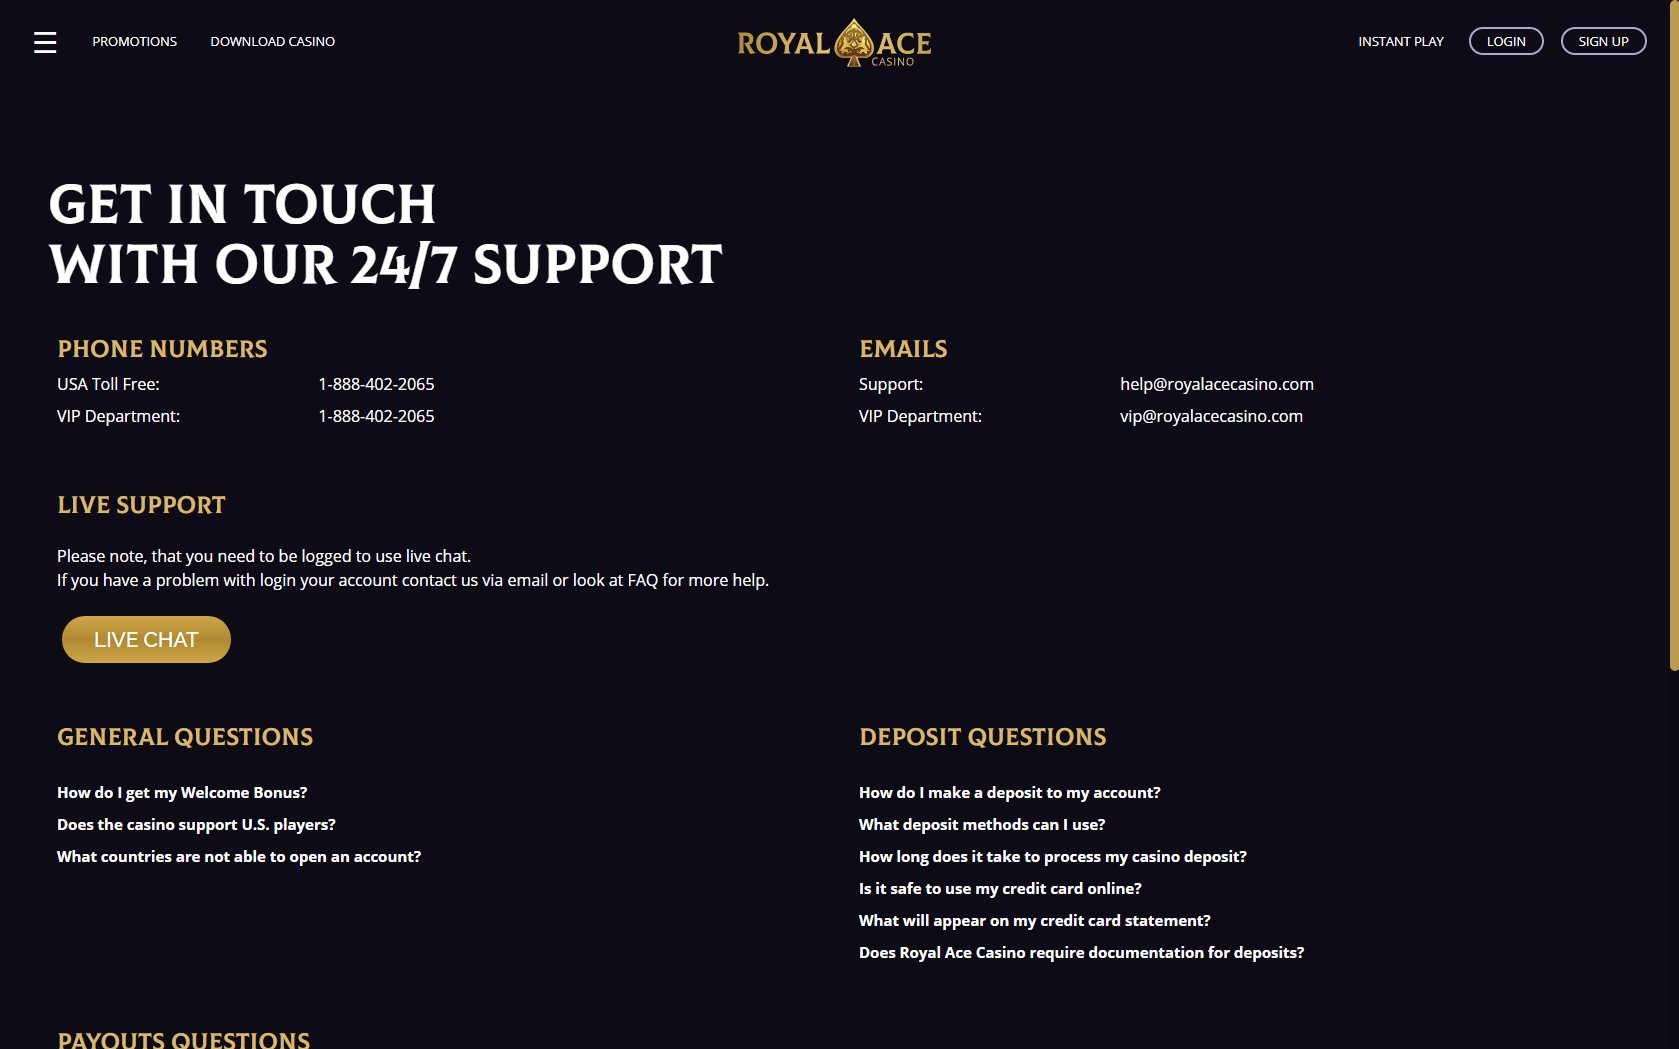 Royal Ace Casino Support